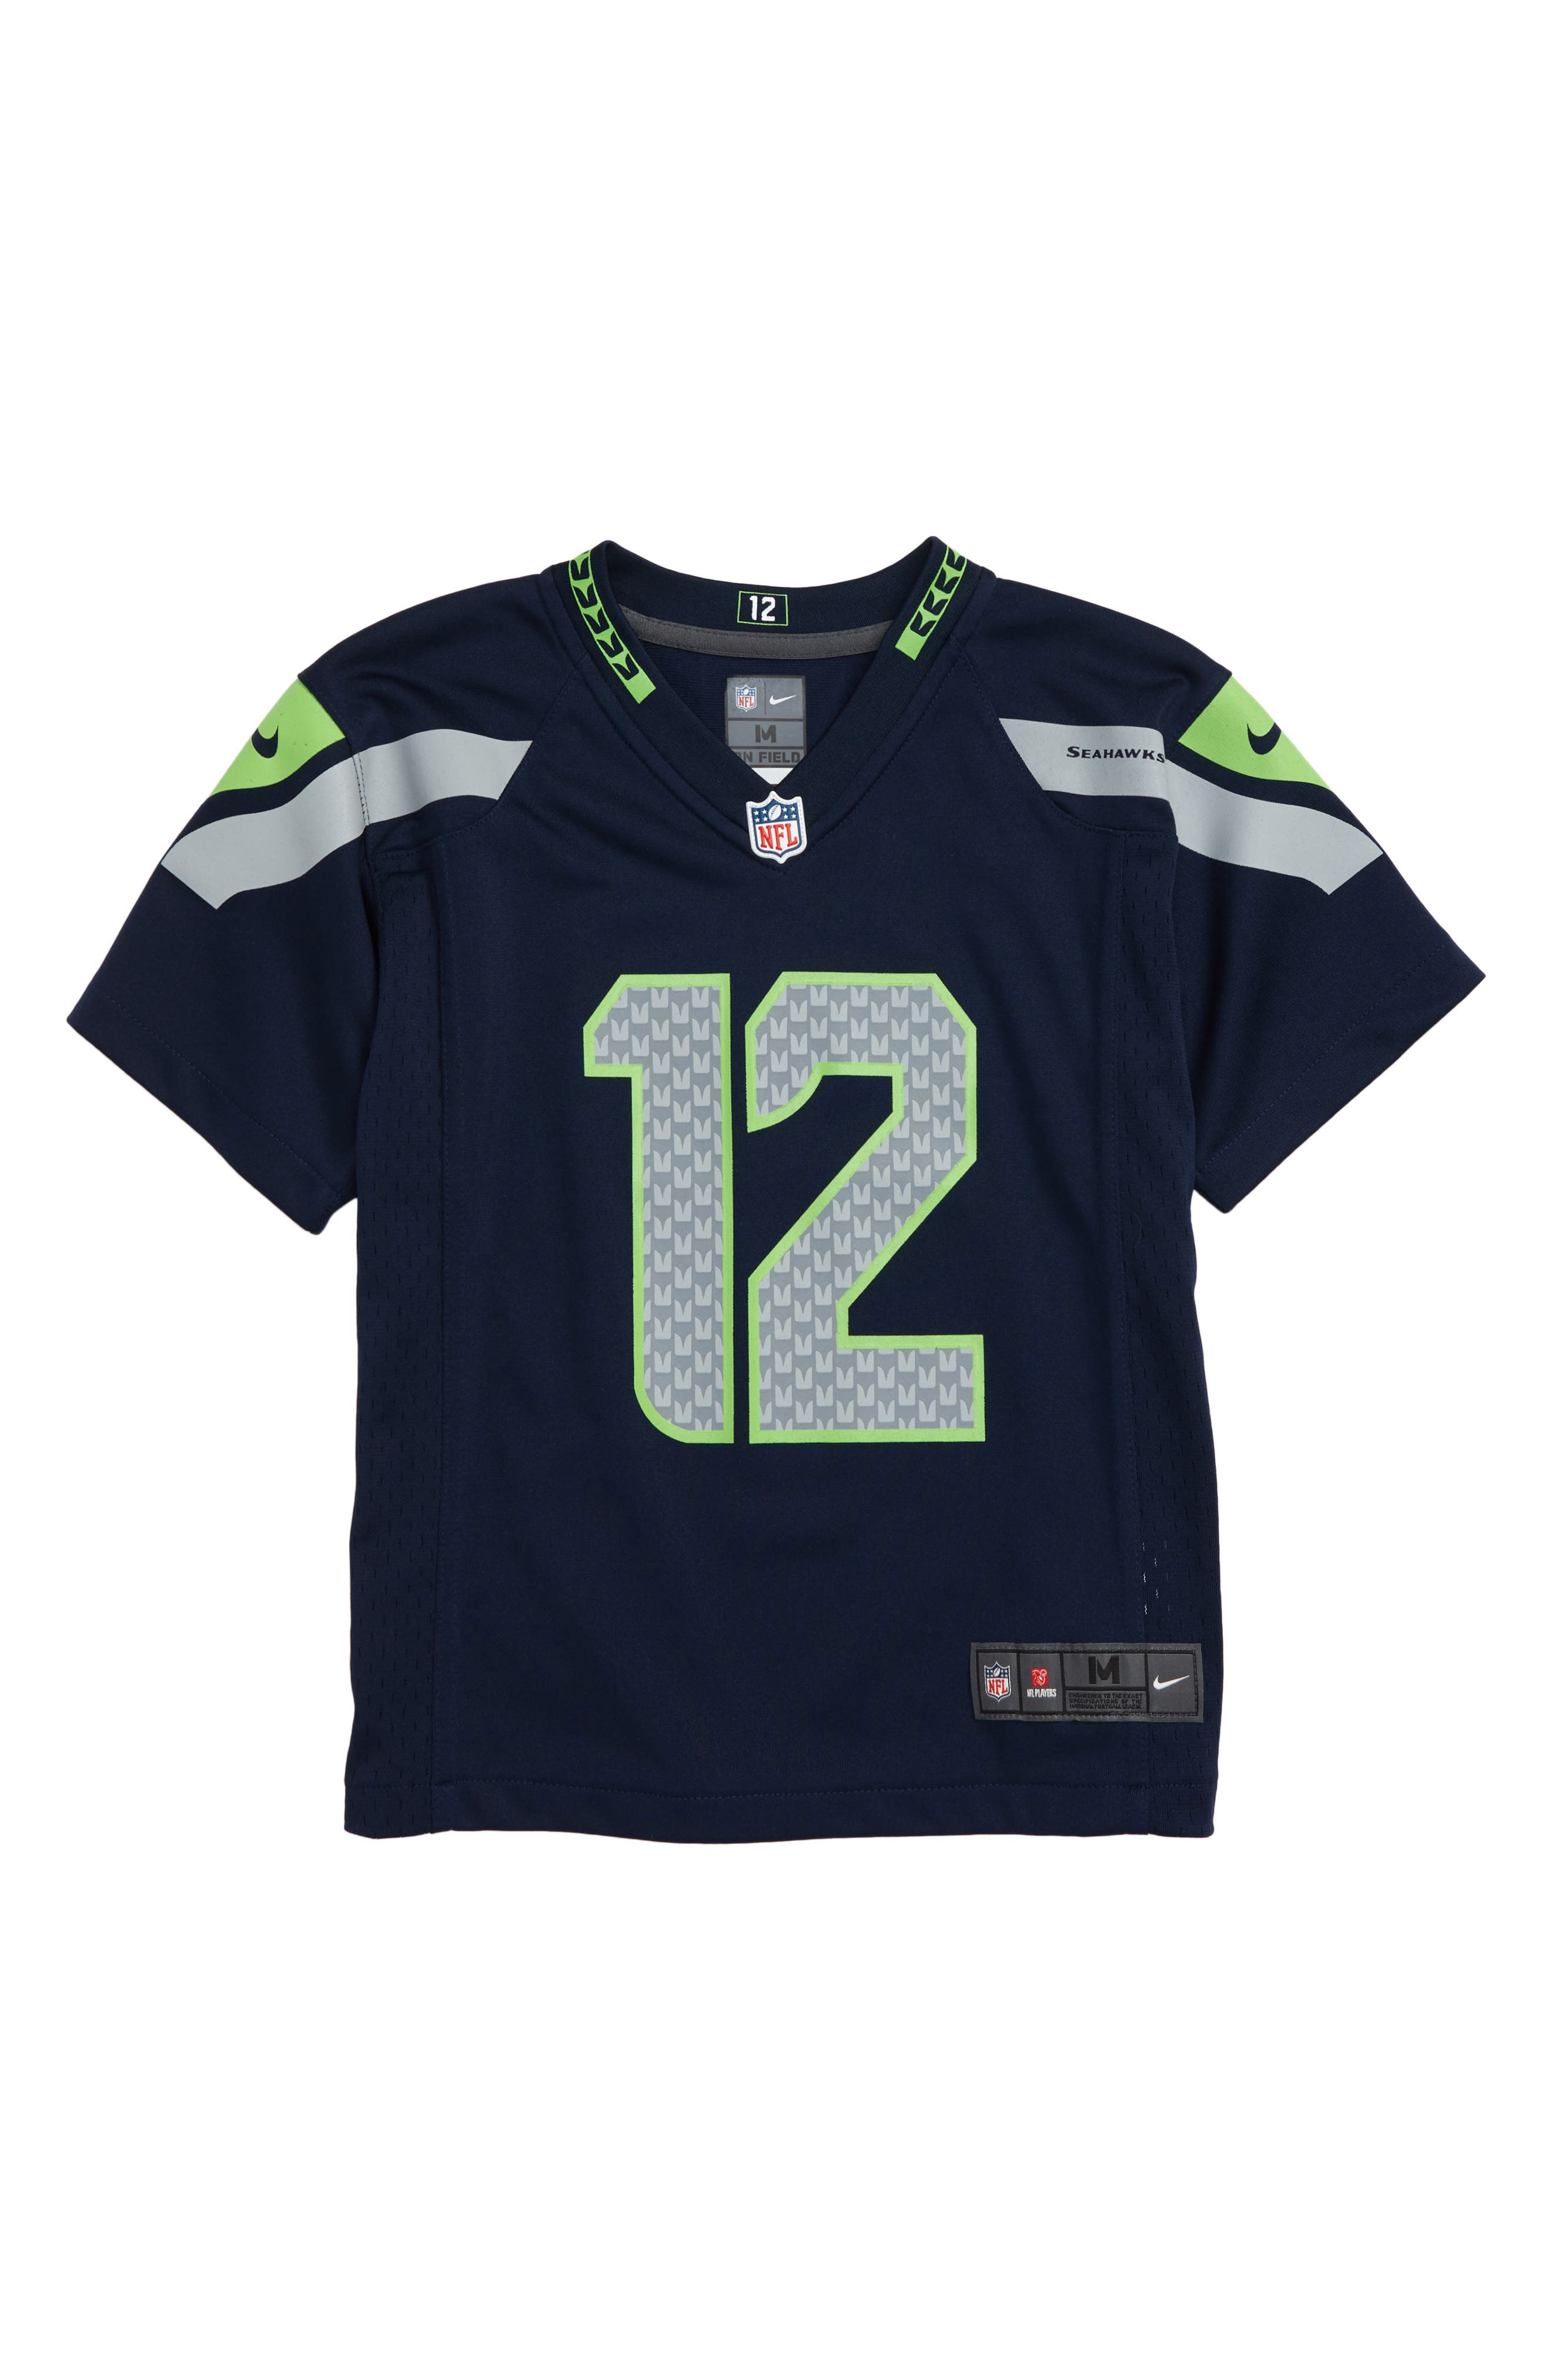 official seahawks jersey